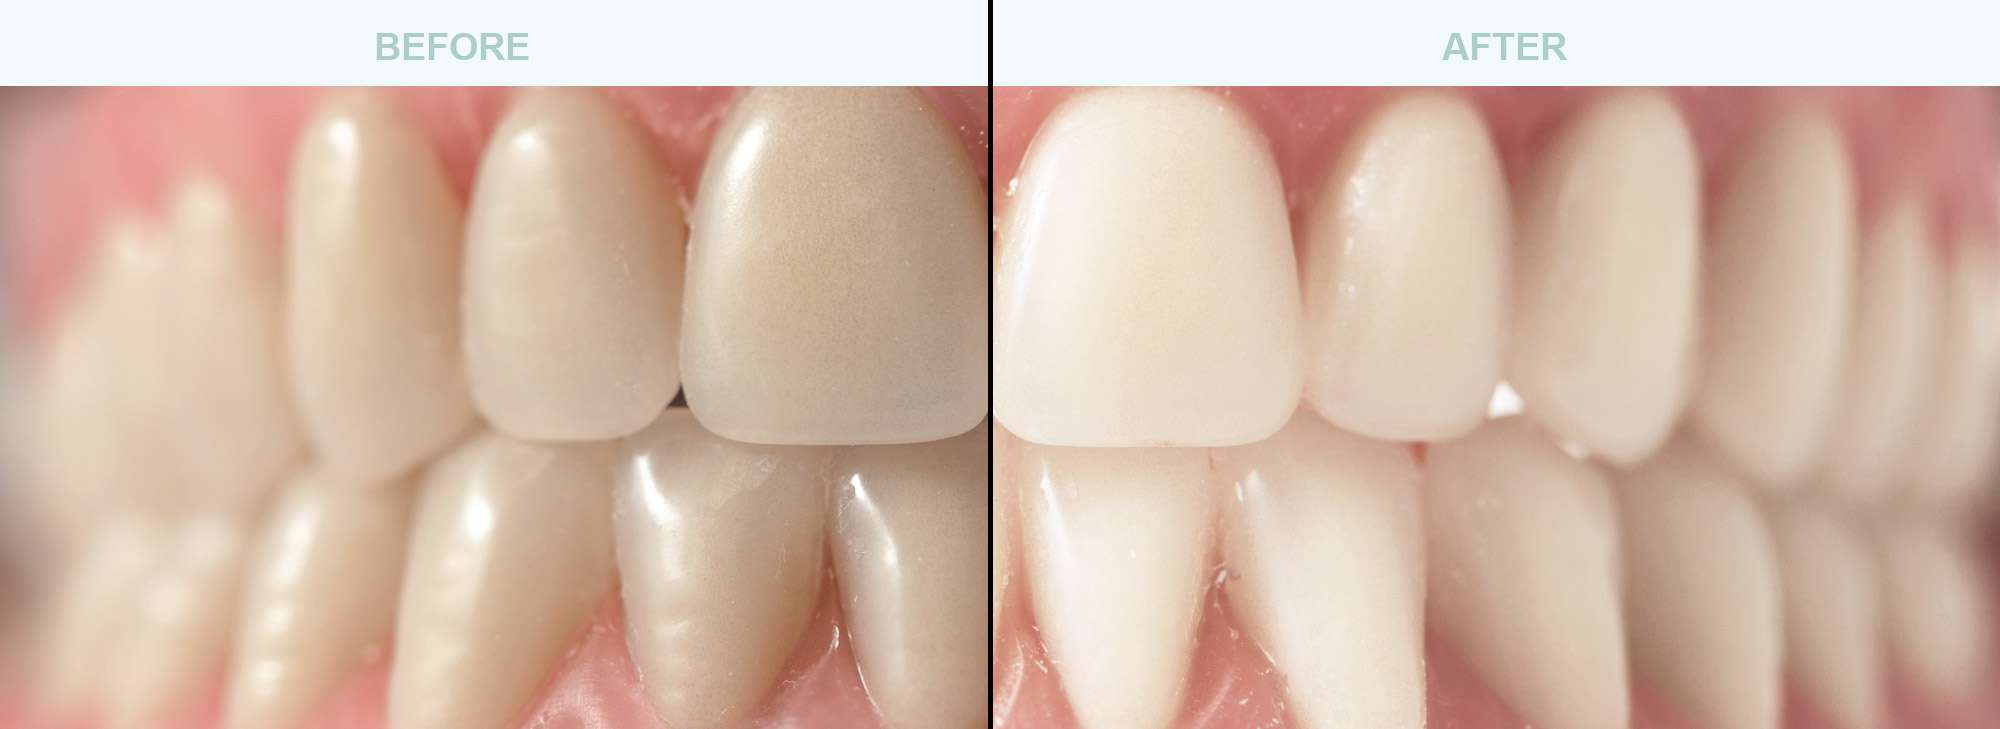 Teeth-Whitening-before-after